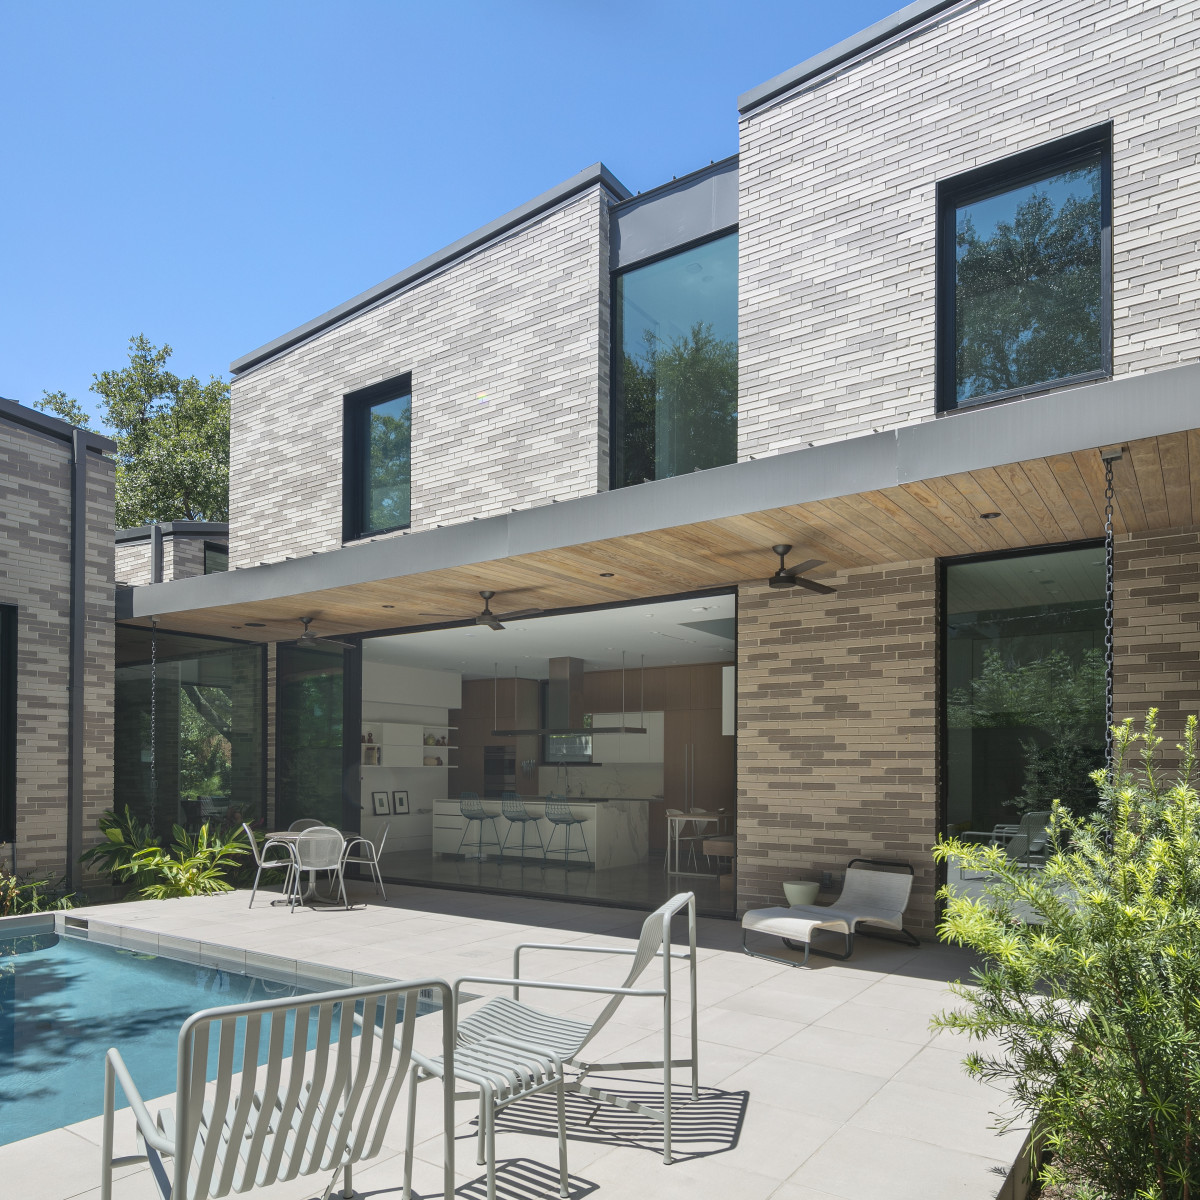 8 Houston architectural stunners open their doors to AIA home tour